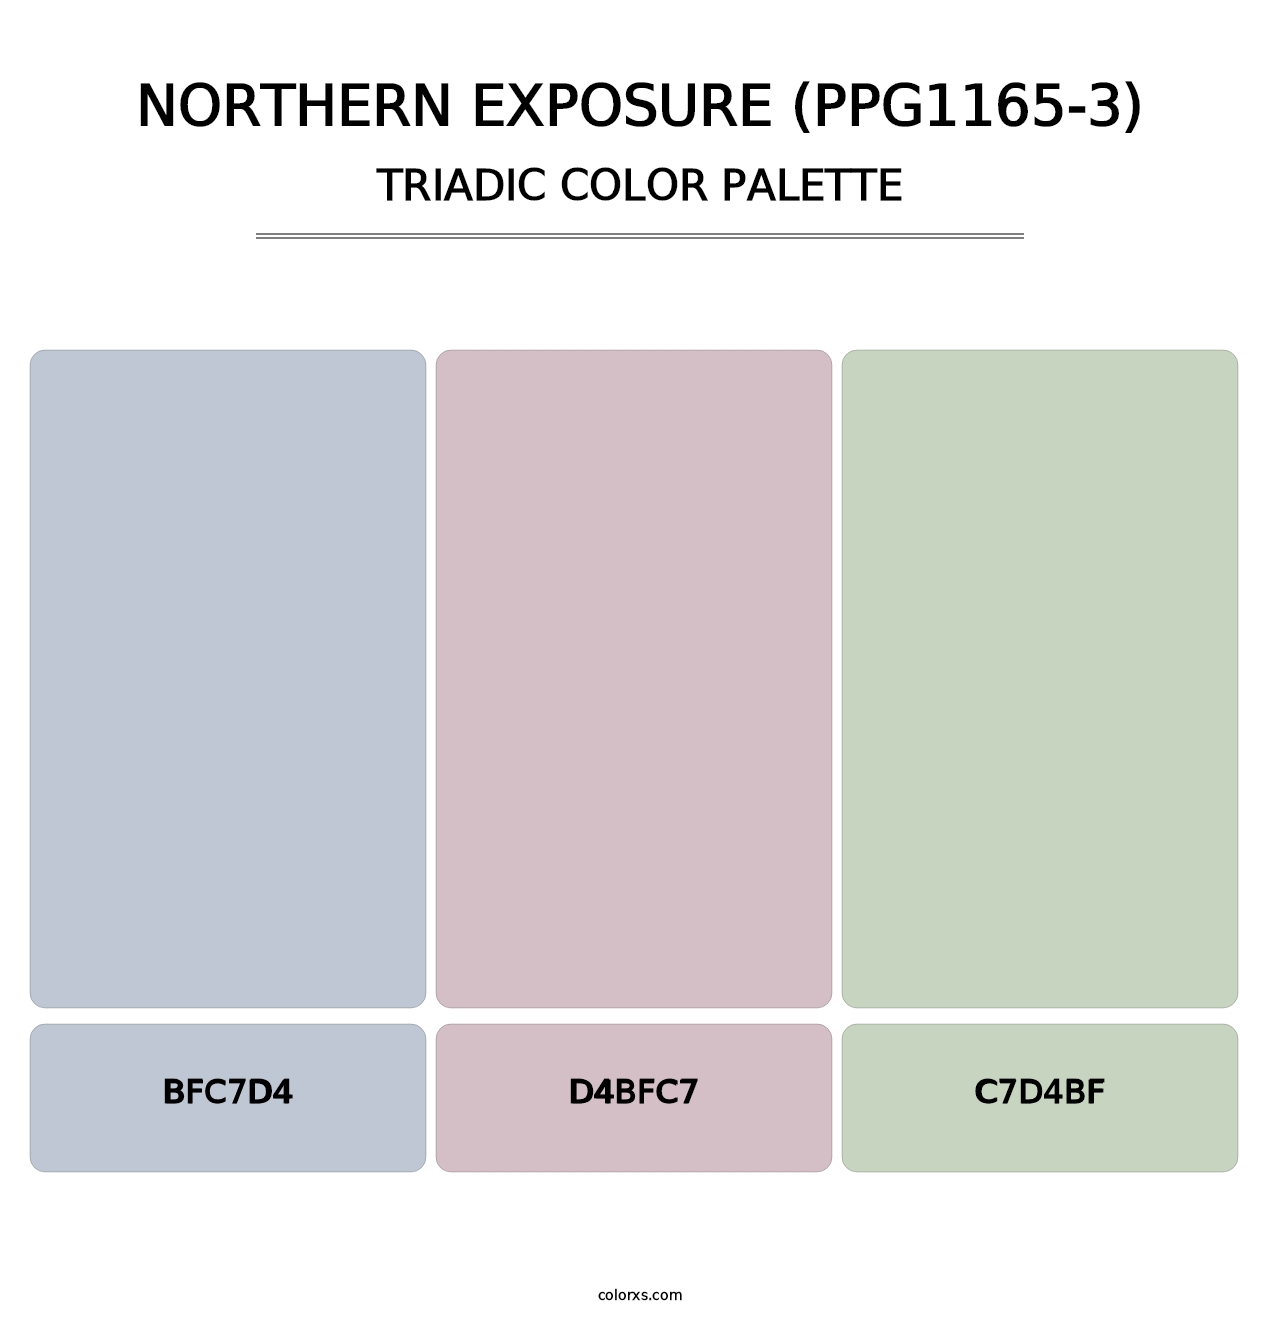 Northern Exposure (PPG1165-3) - Triadic Color Palette